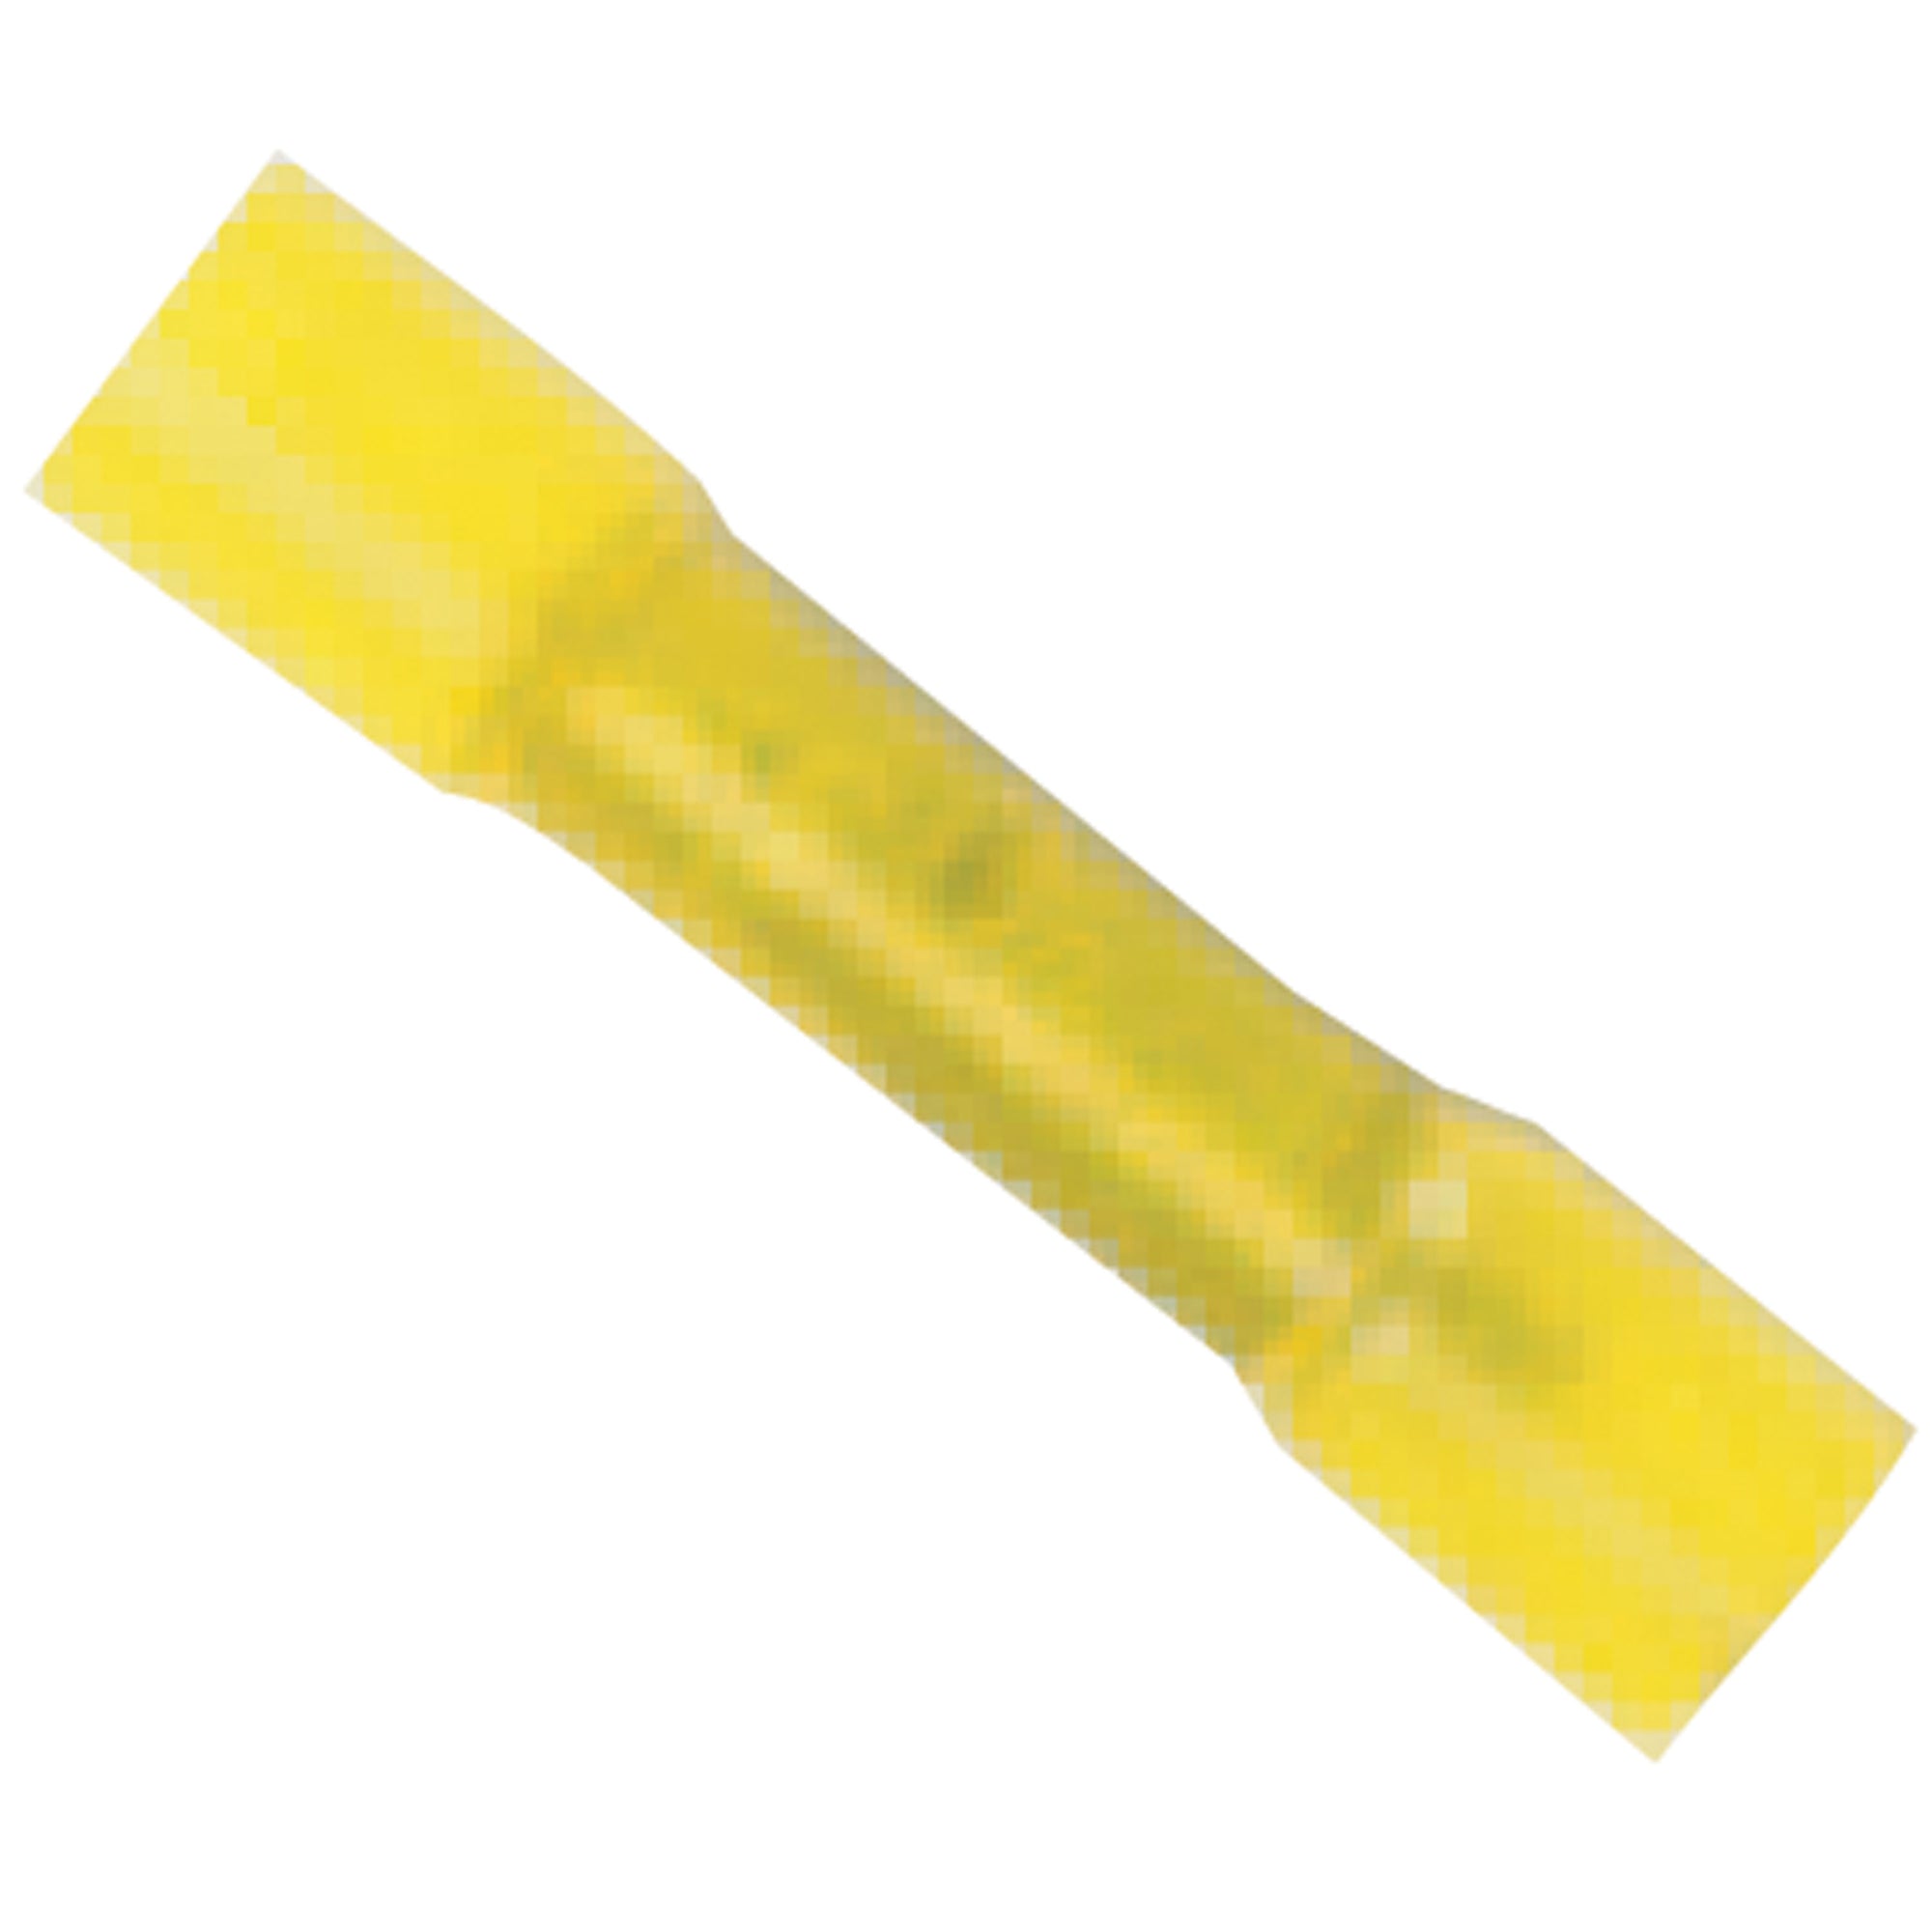 Ancor 309203 Heat Shrink Butt Connector - 12-10, Yellow, Pack of 3